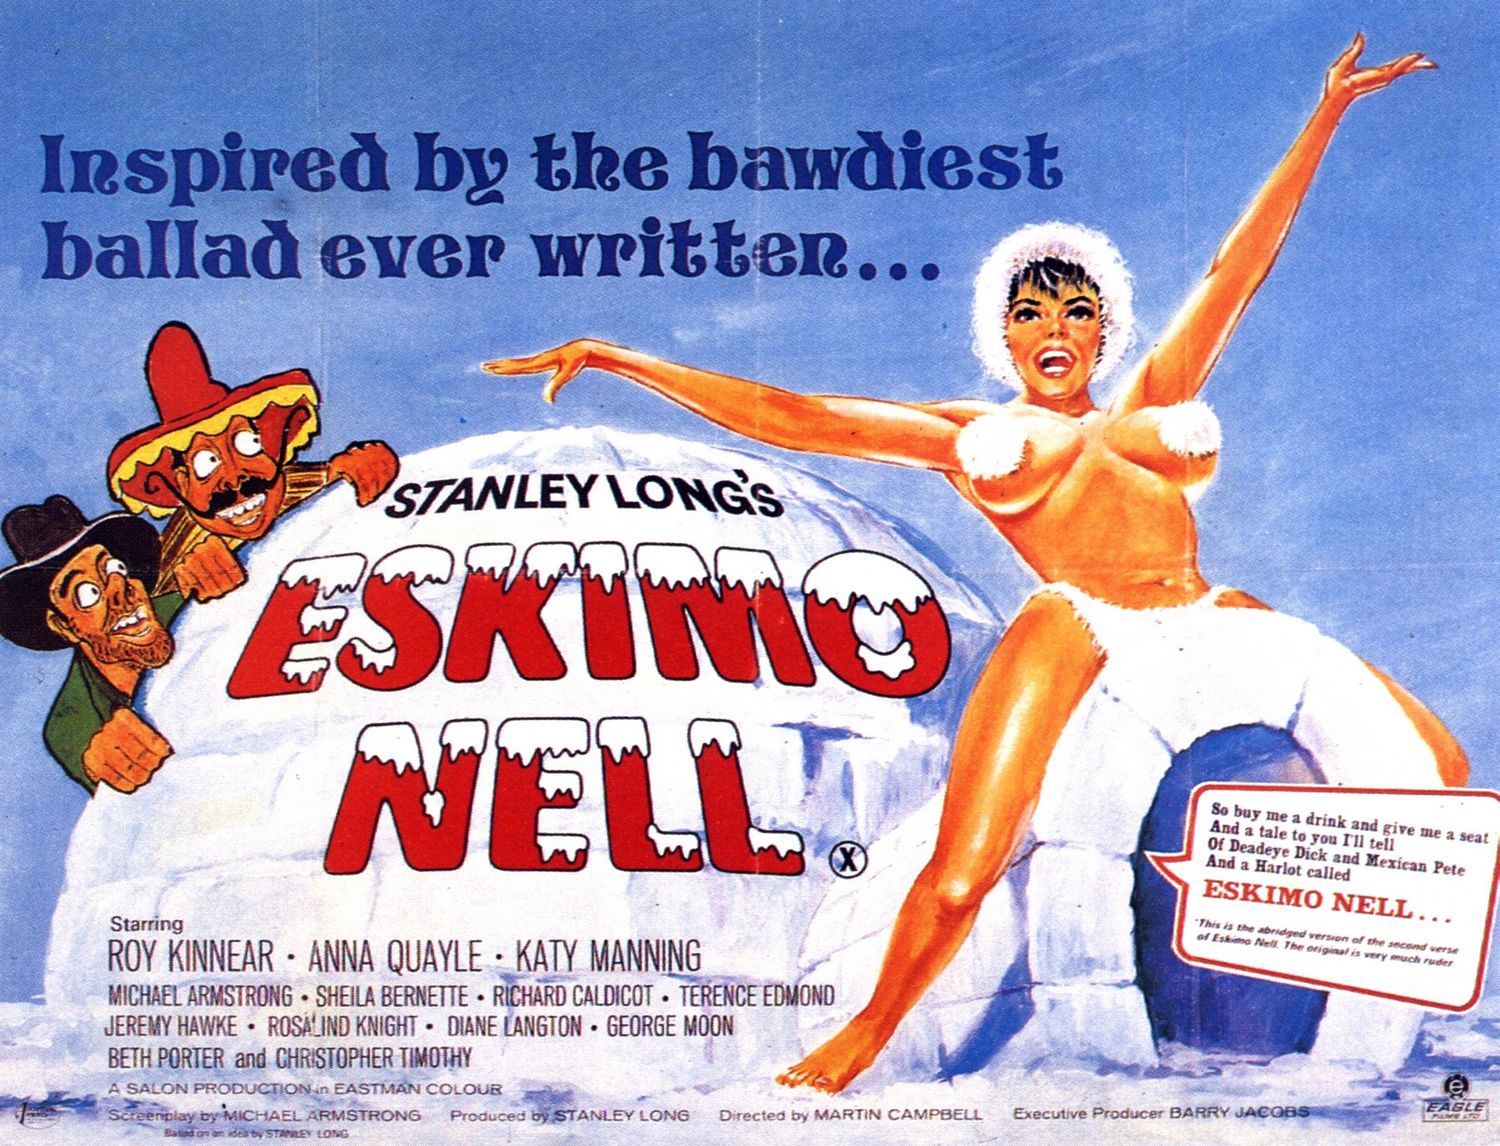 Extra Large Movie Poster Image for Eskimo Nell 